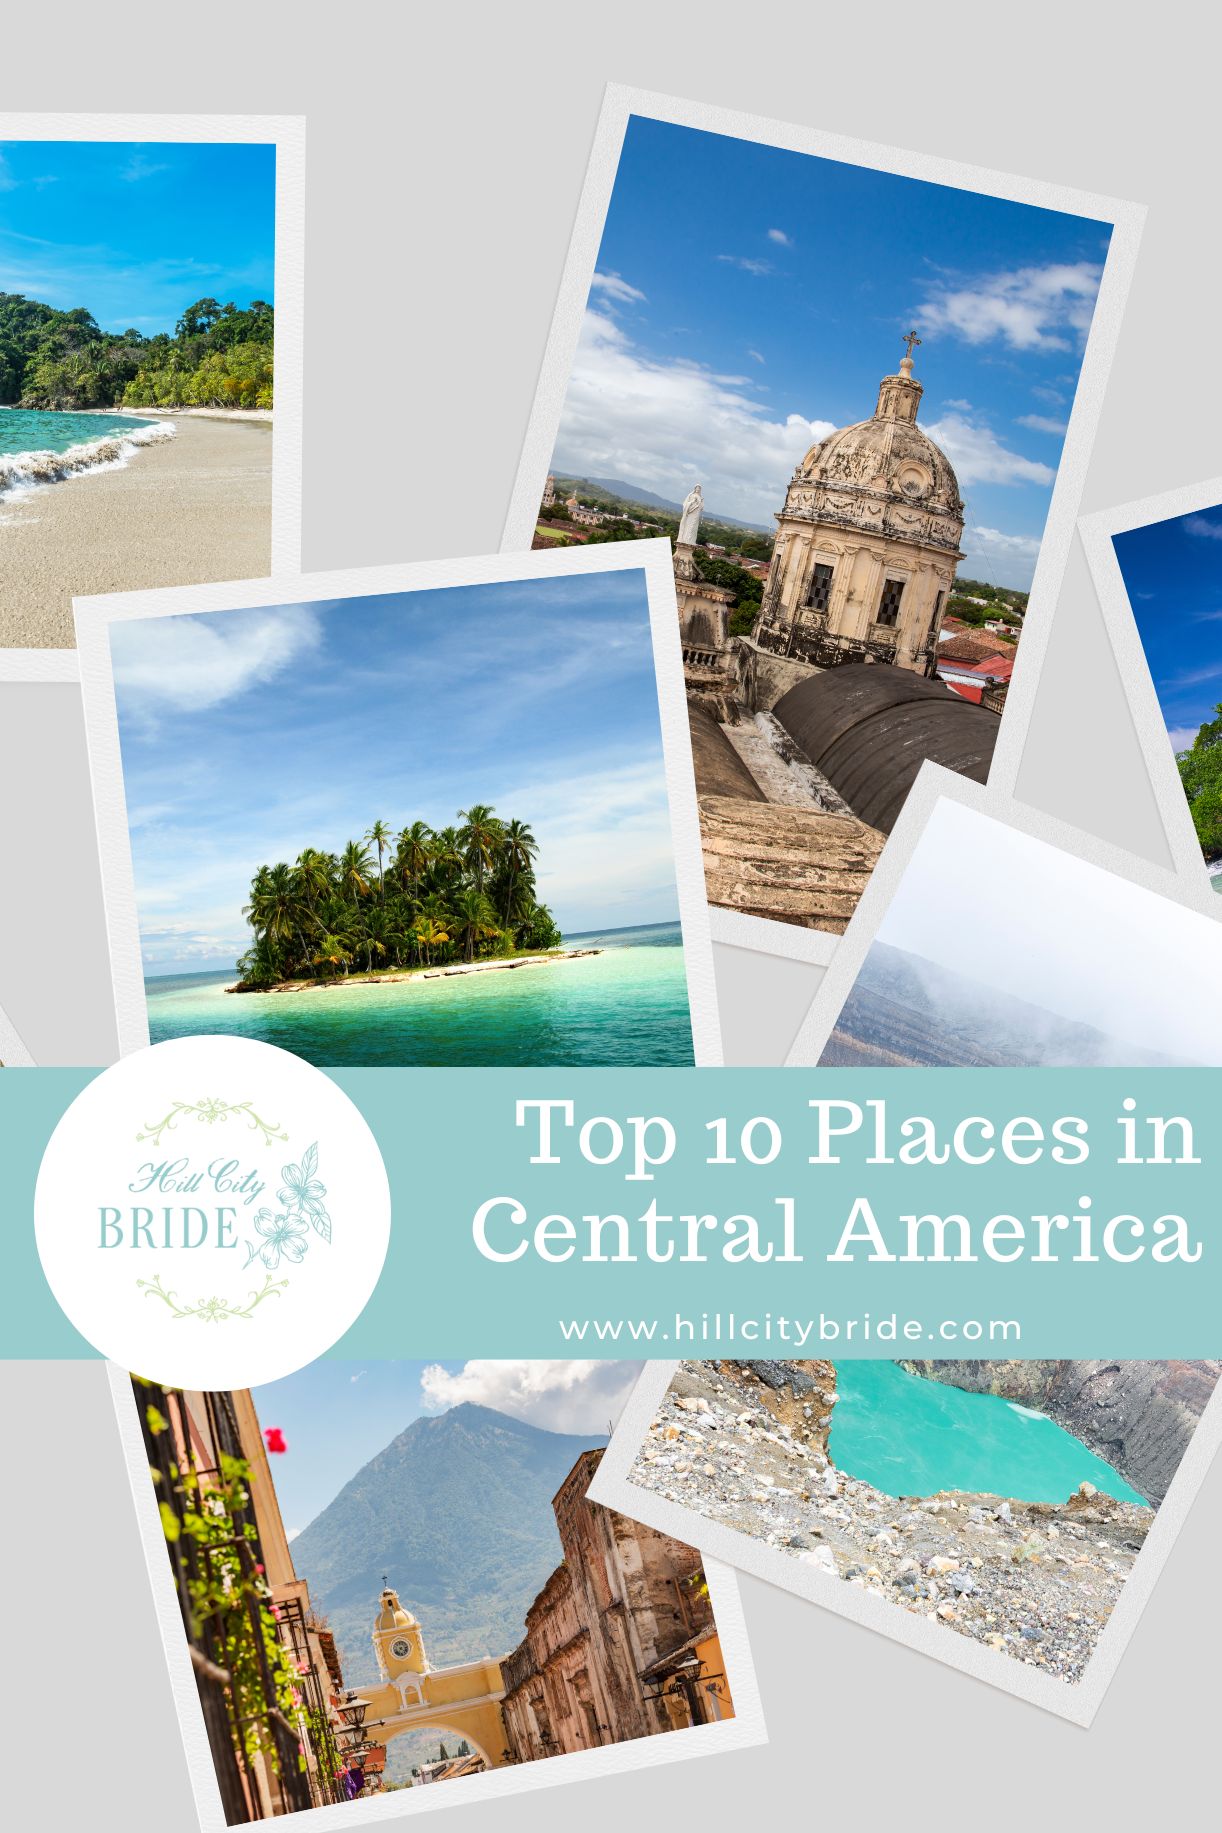 Best Places to Honeymoon in Central America